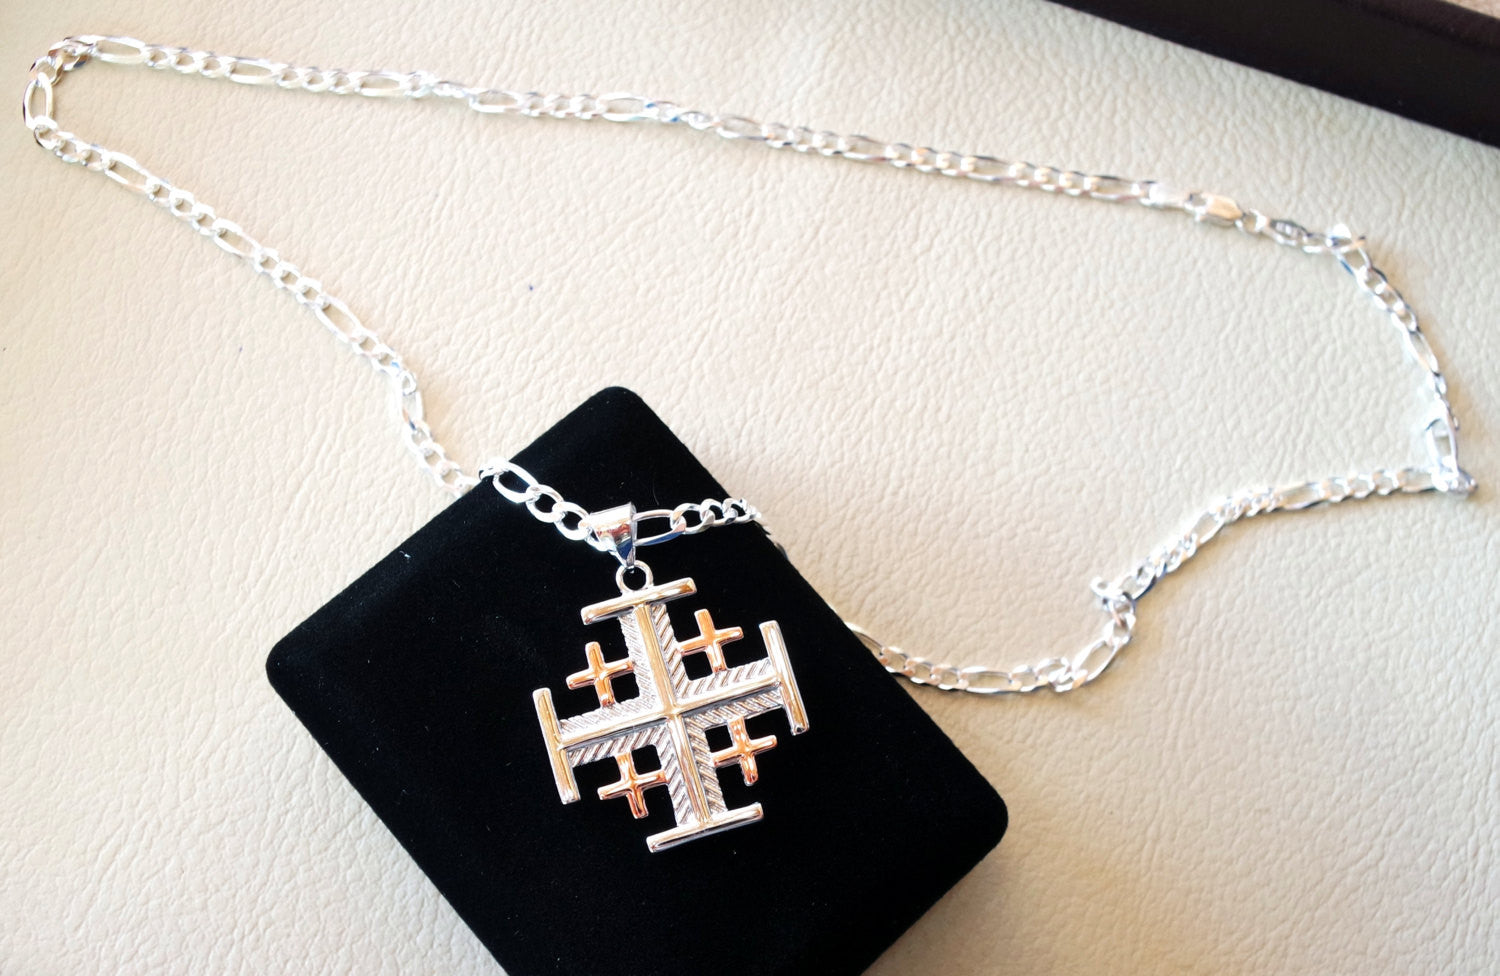 Jerusalem cross pendant two tone with heavy chain sterling silver 925 middle eastern jewelry christianity handmade heavy fast shipping